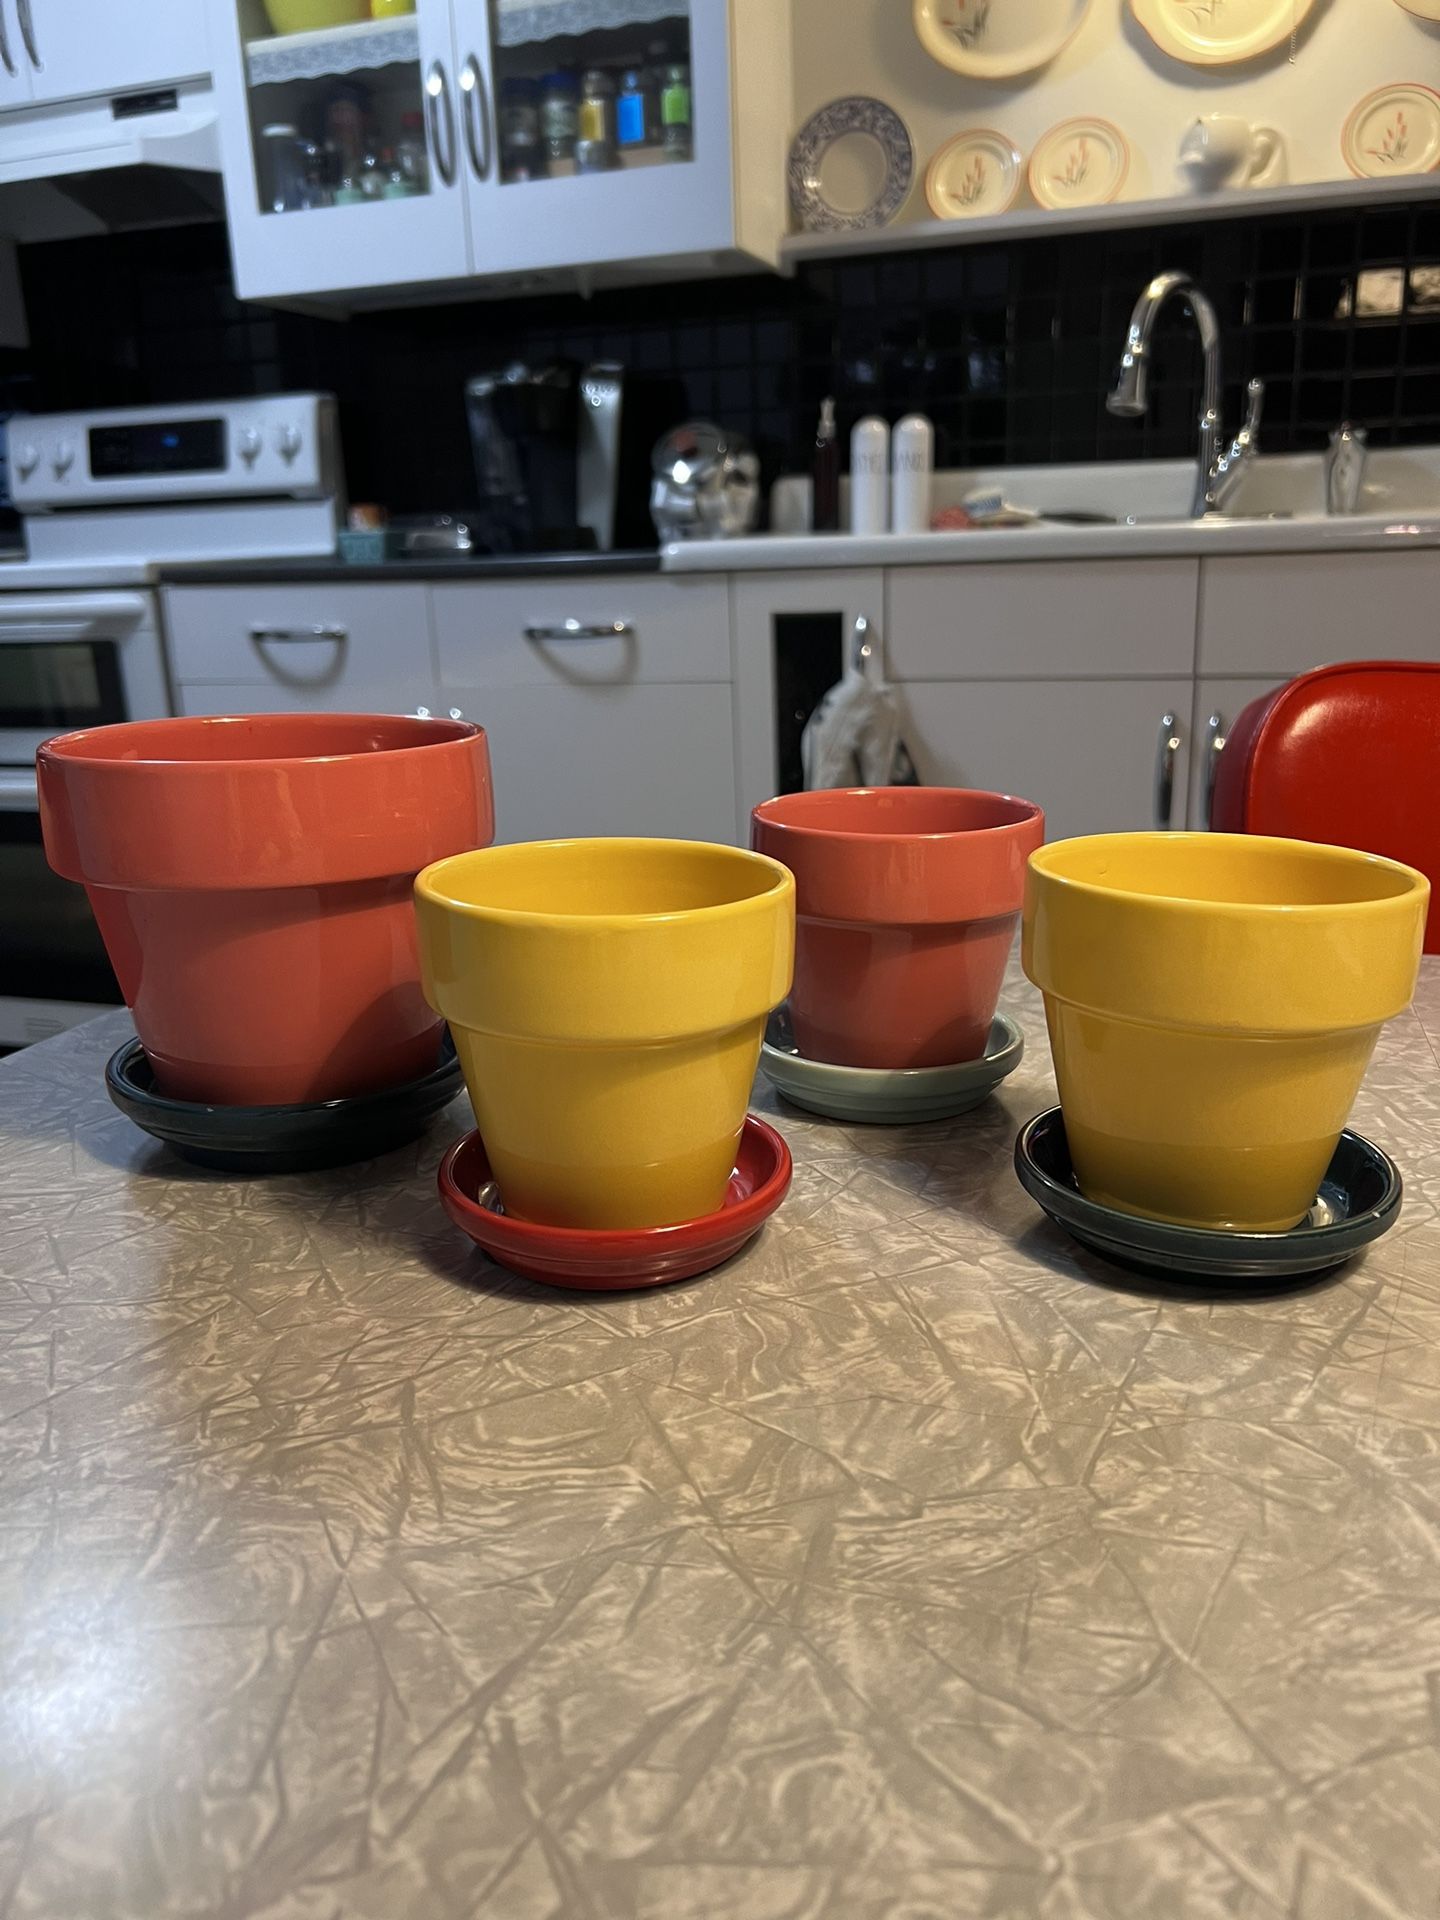 4 Ceramic Flower Pots With Saucers